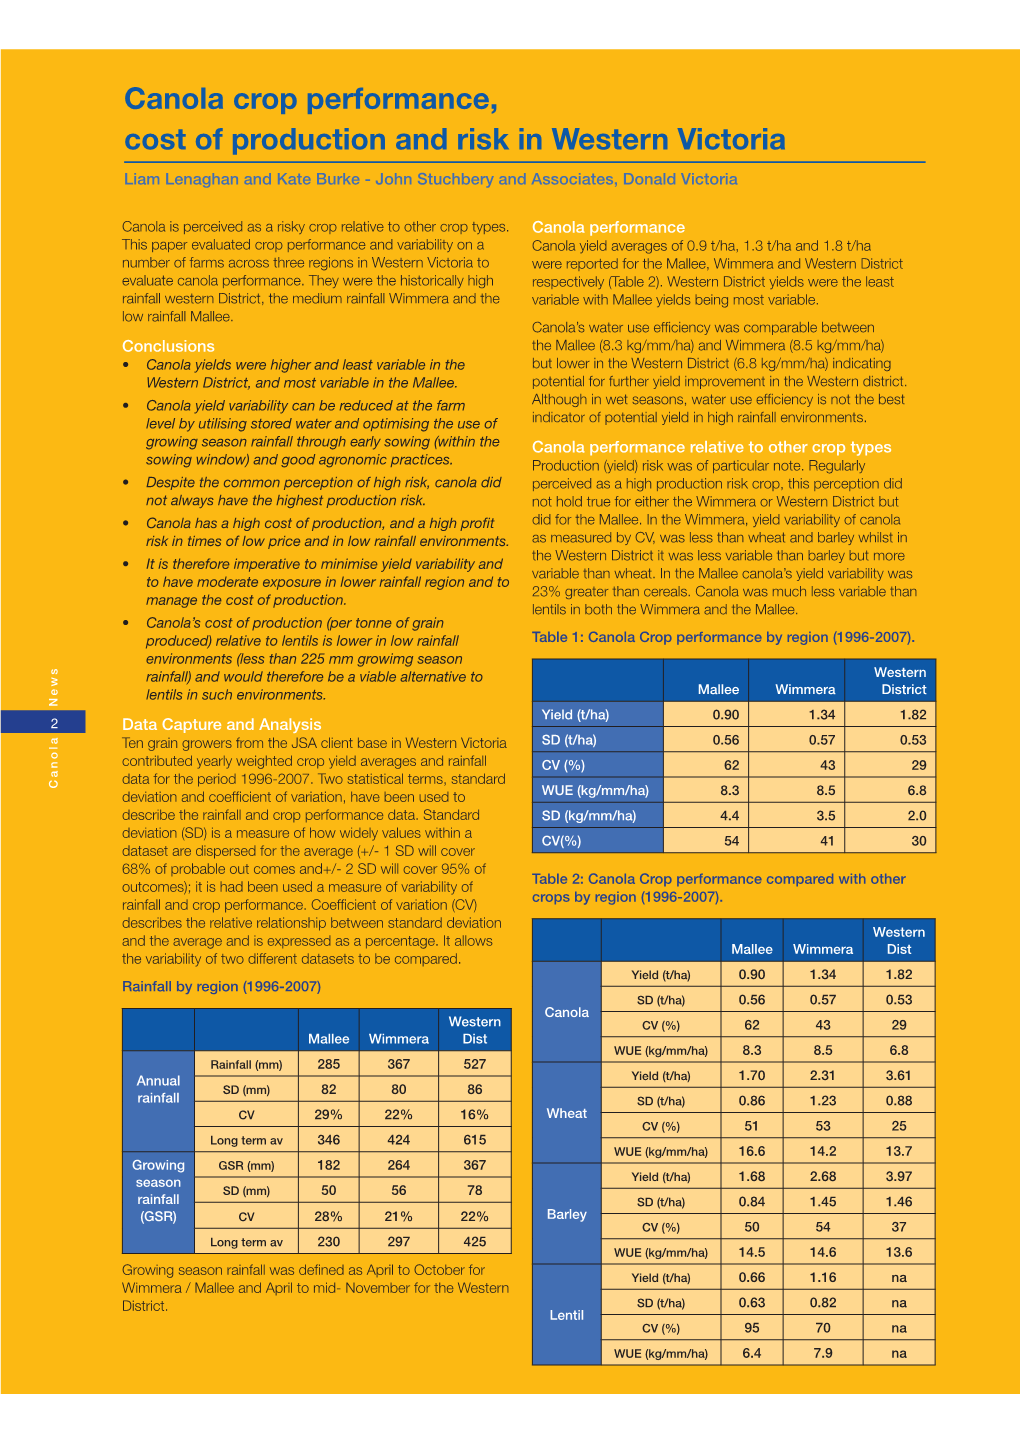 Canola Crop Performance, Cost of Production and Risk in Western Victoria Liam Lenaghan and Kate Burke - John Stuchbery and Associates, Donald Victoria